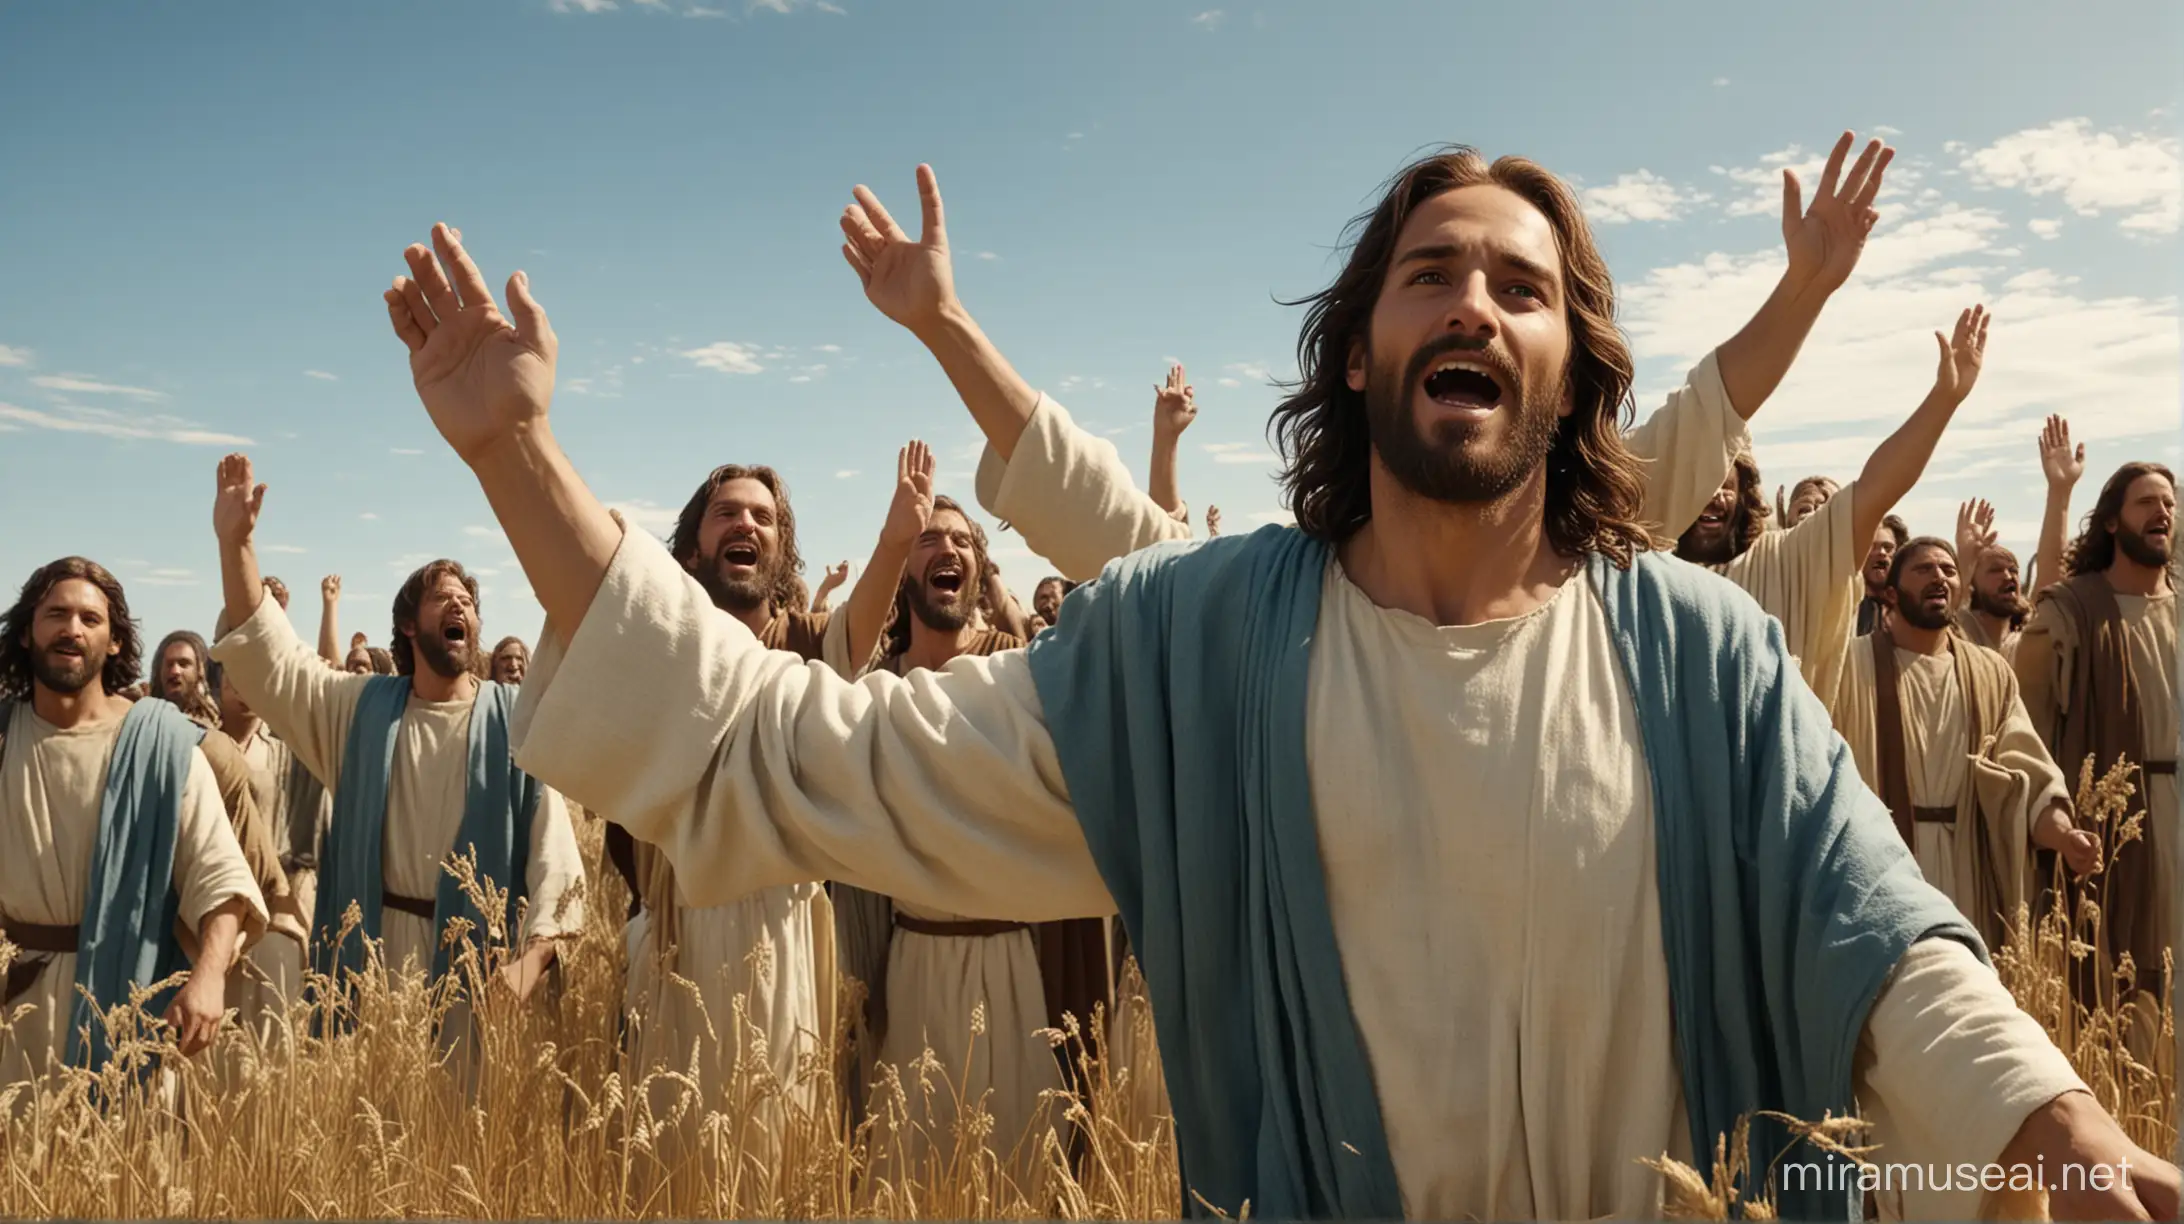 create an image of Jesus in an open field with his group of people, sócelebrating estern,under a serene blue and sunny sky. 6k resolution, more realistic, based on the movie The Passion of the Christ.